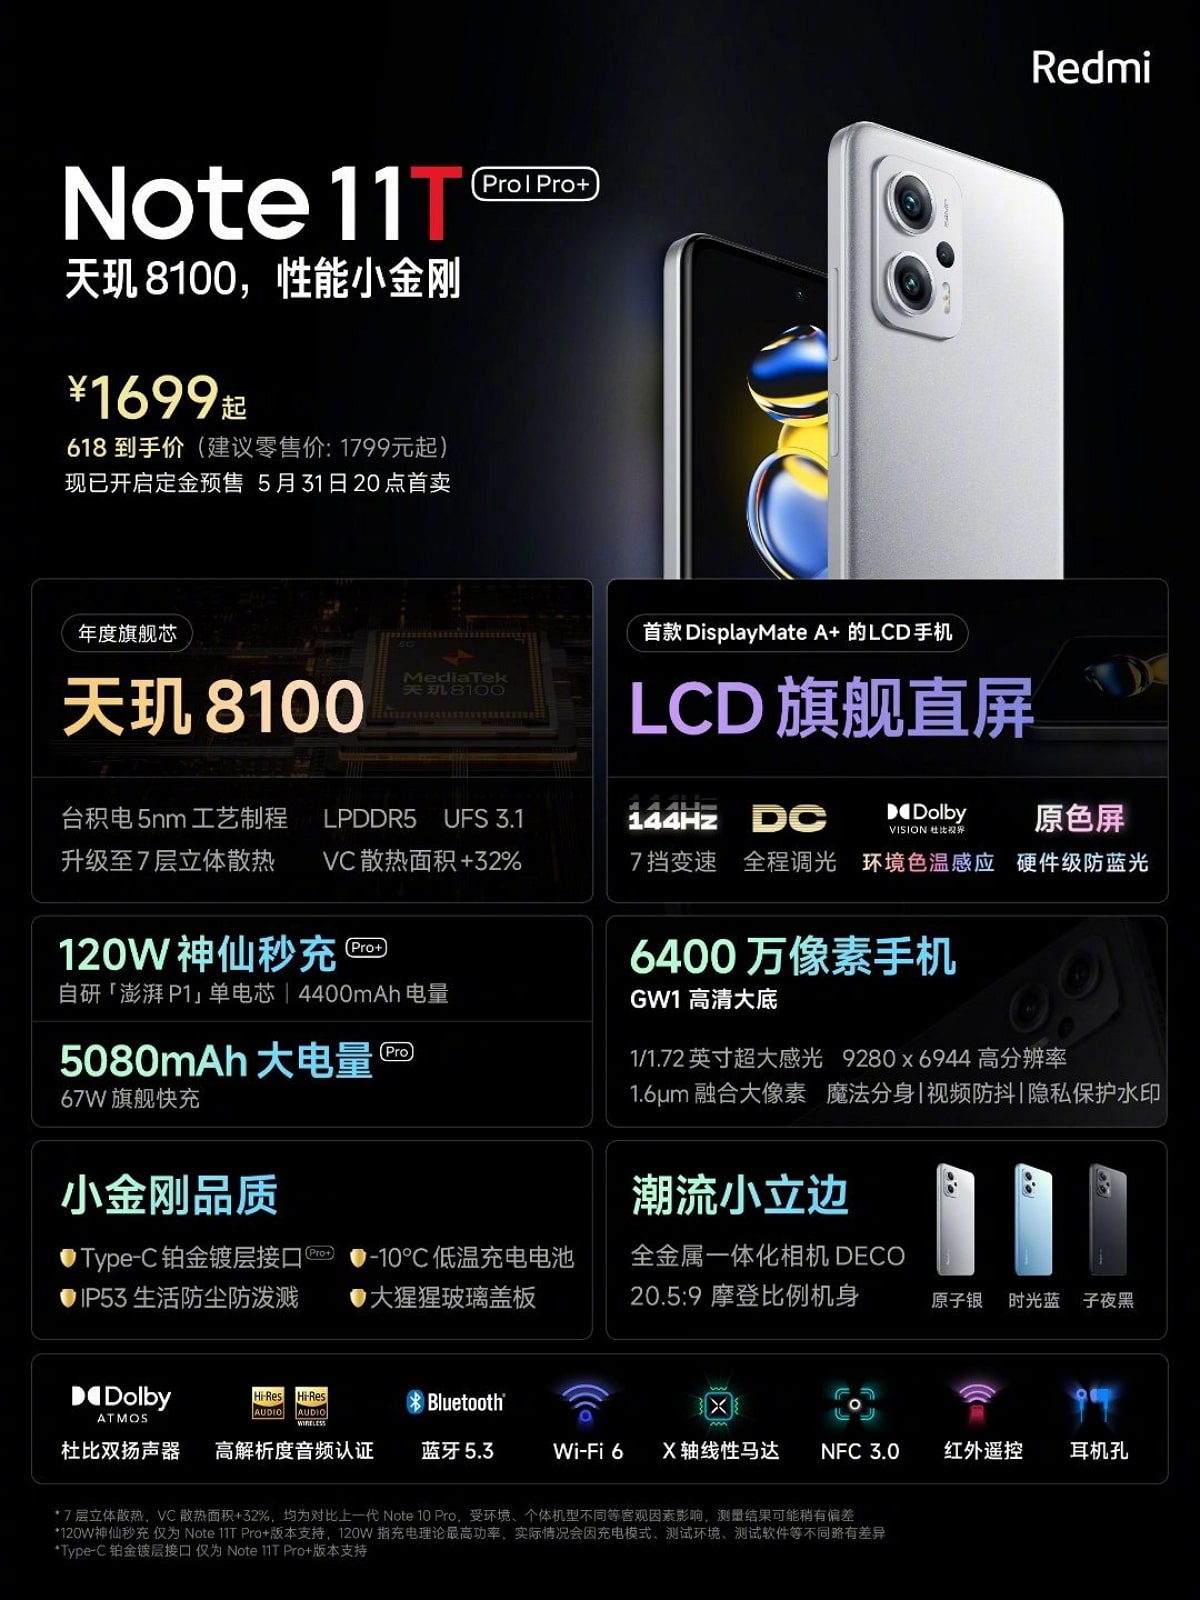 Redmi Note 11T Pro and Pro+